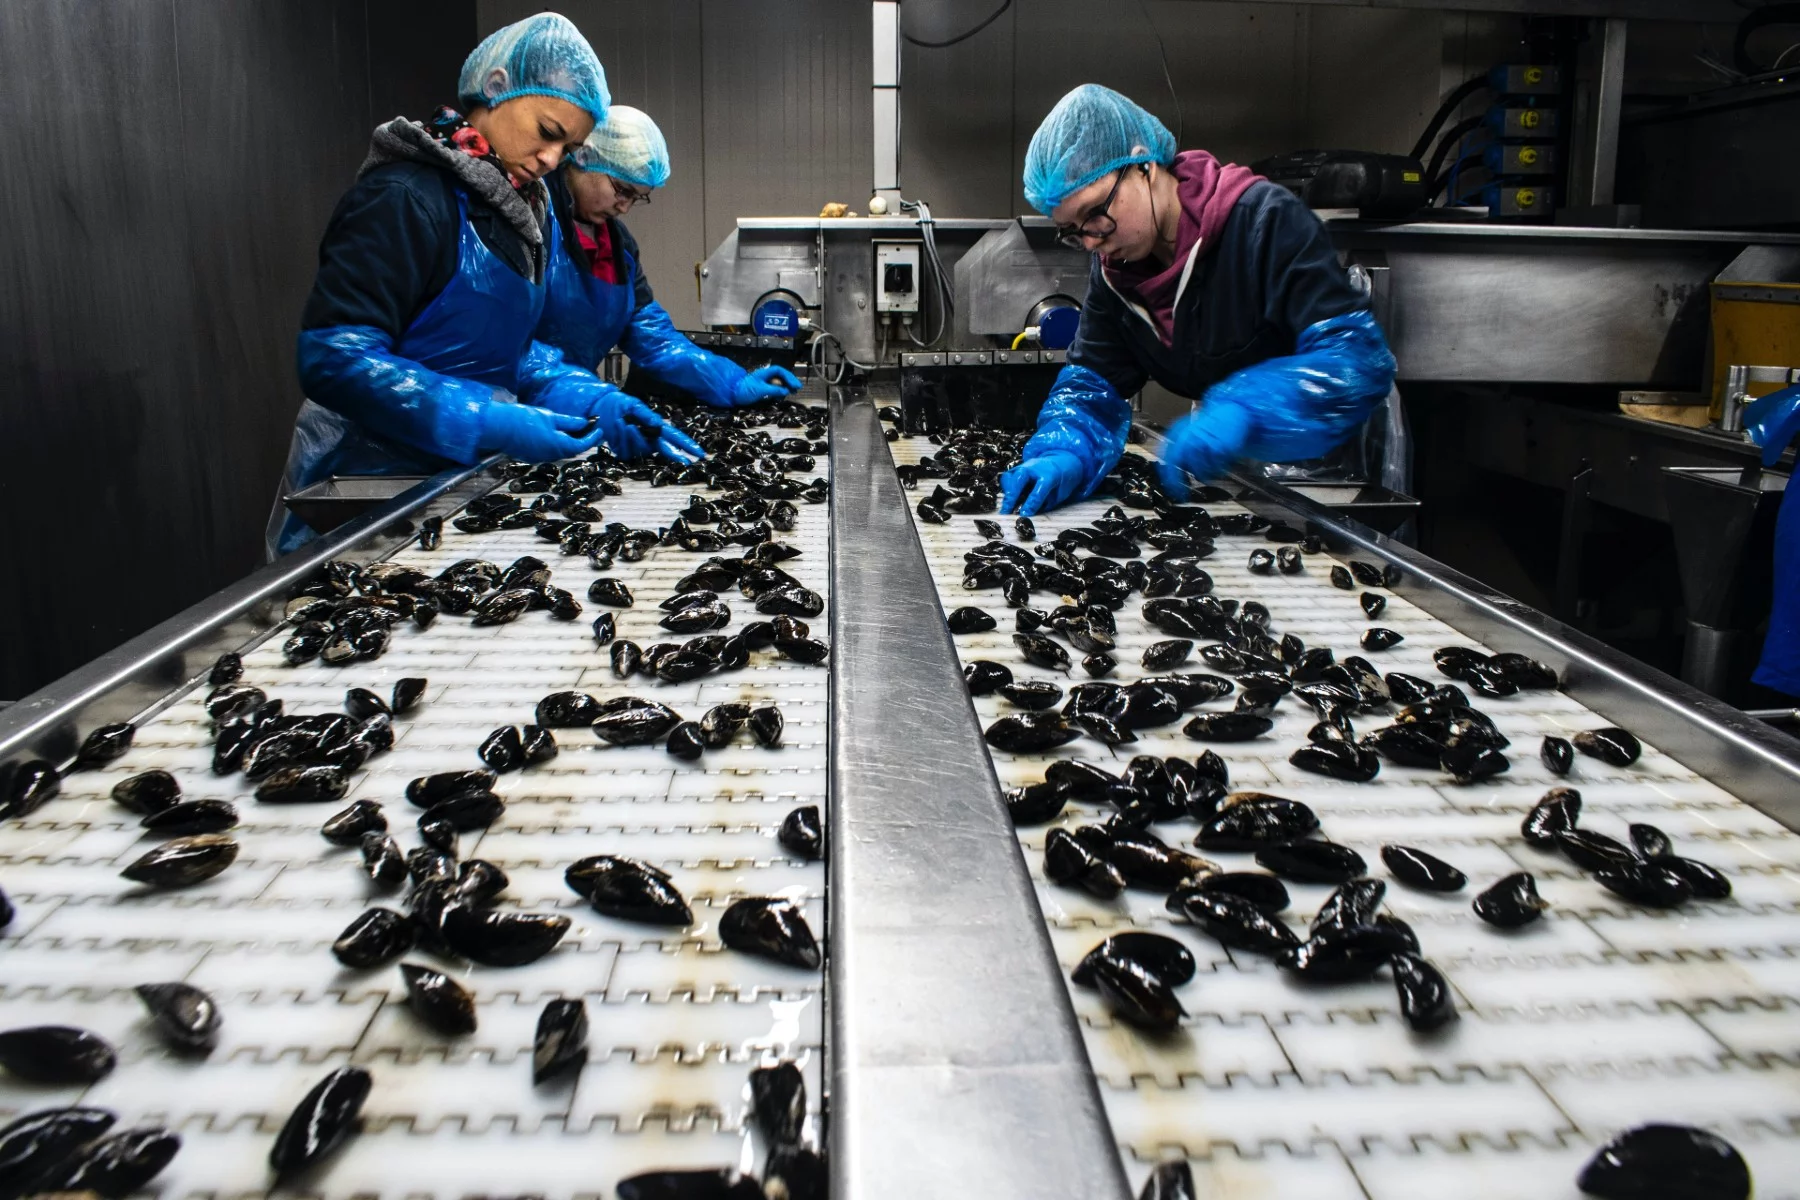 Three factory workers sorting mussels - must earn the minimum wage or above